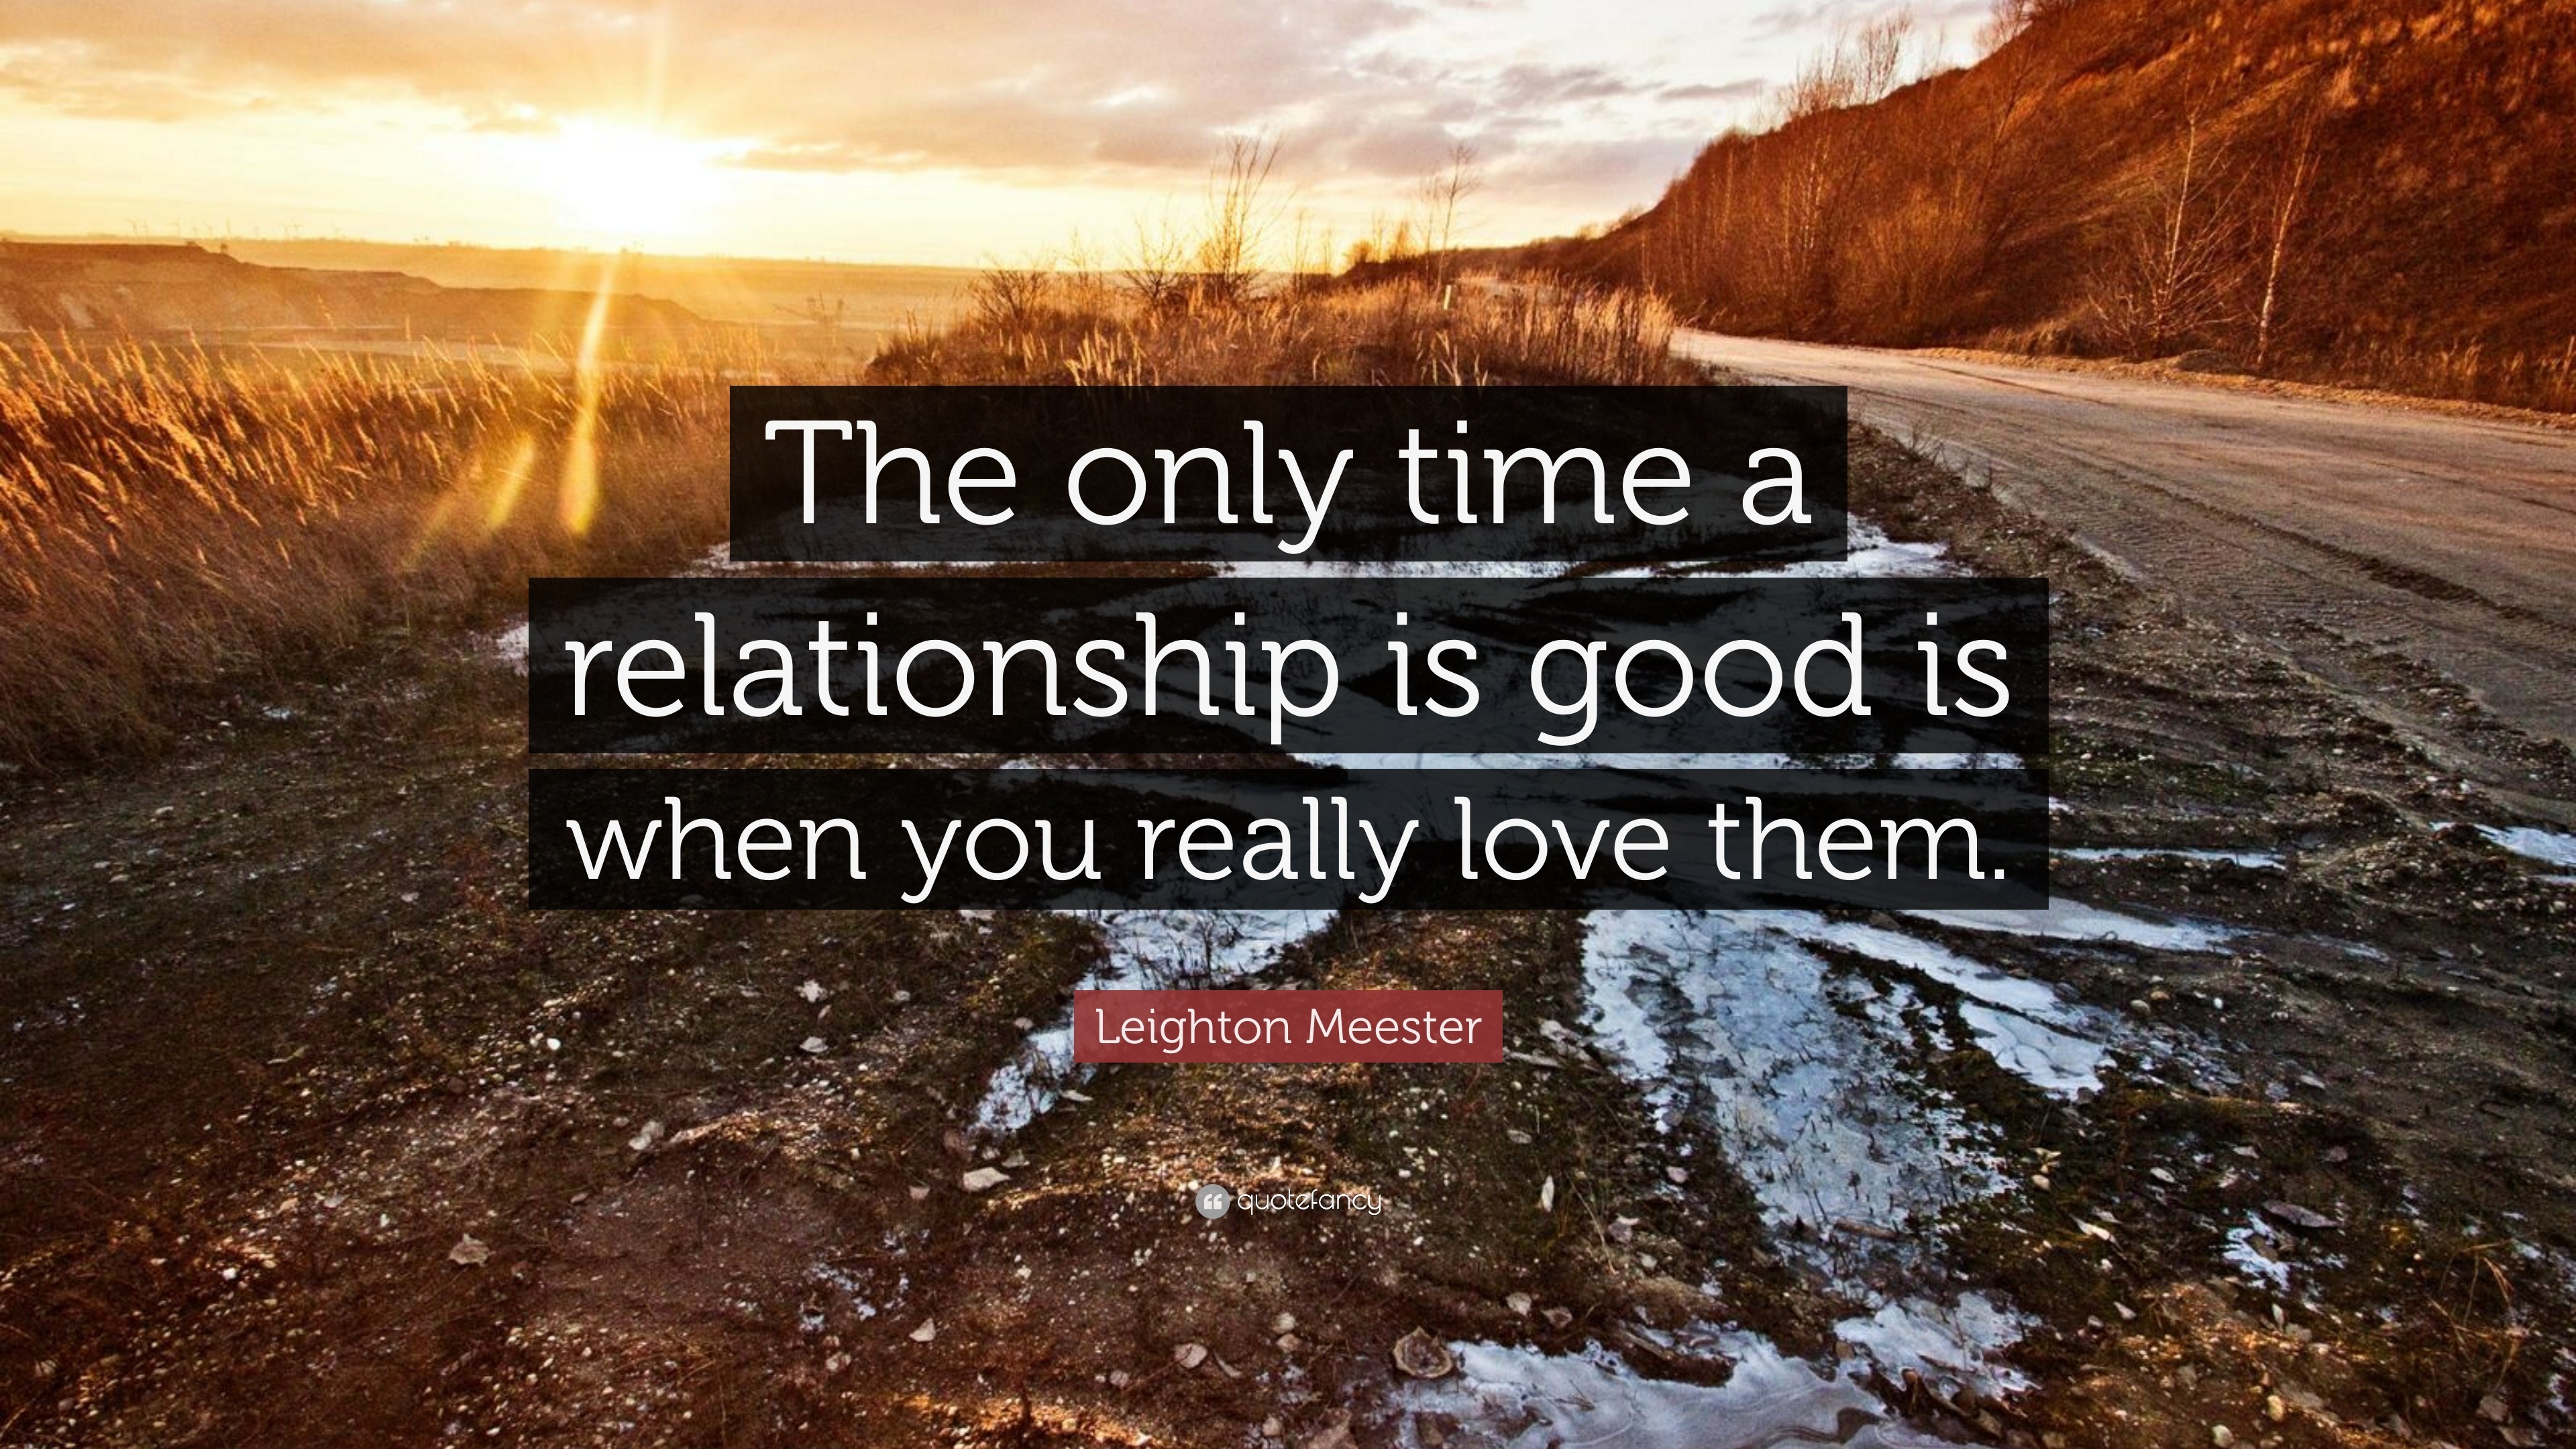 Leighton Meester Quote The Only Time A Relationship Is Good Is When You Really Love Them